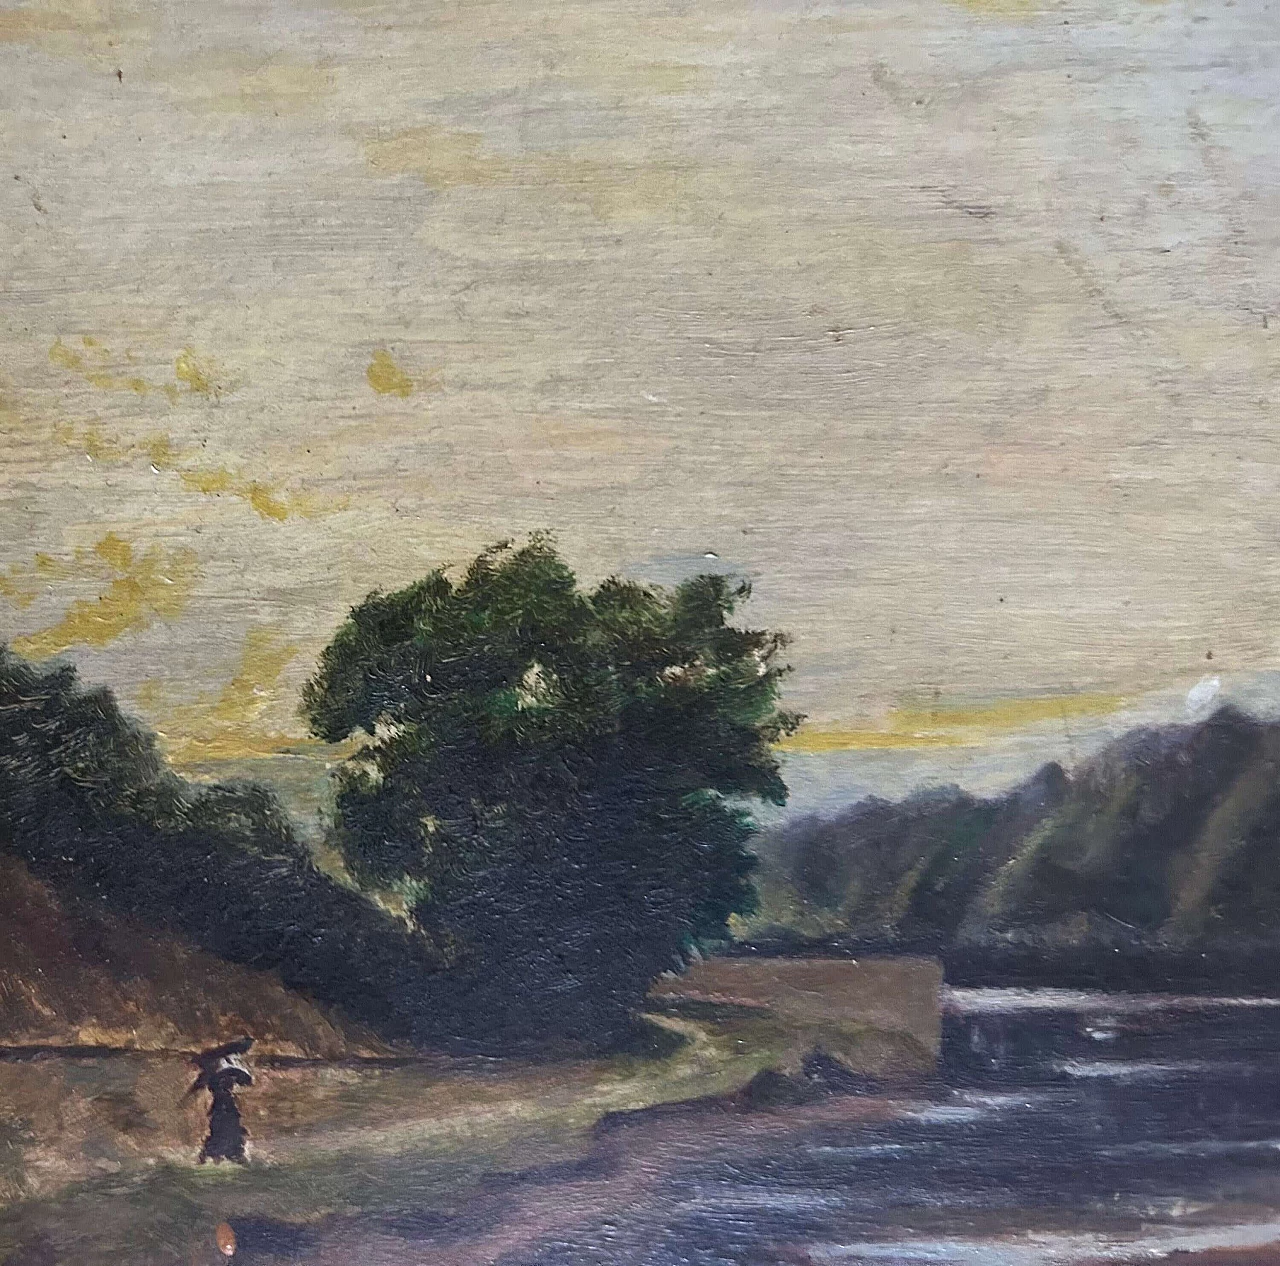 Lake landscape in the style of the Barbizon School, painting, 1920s 6